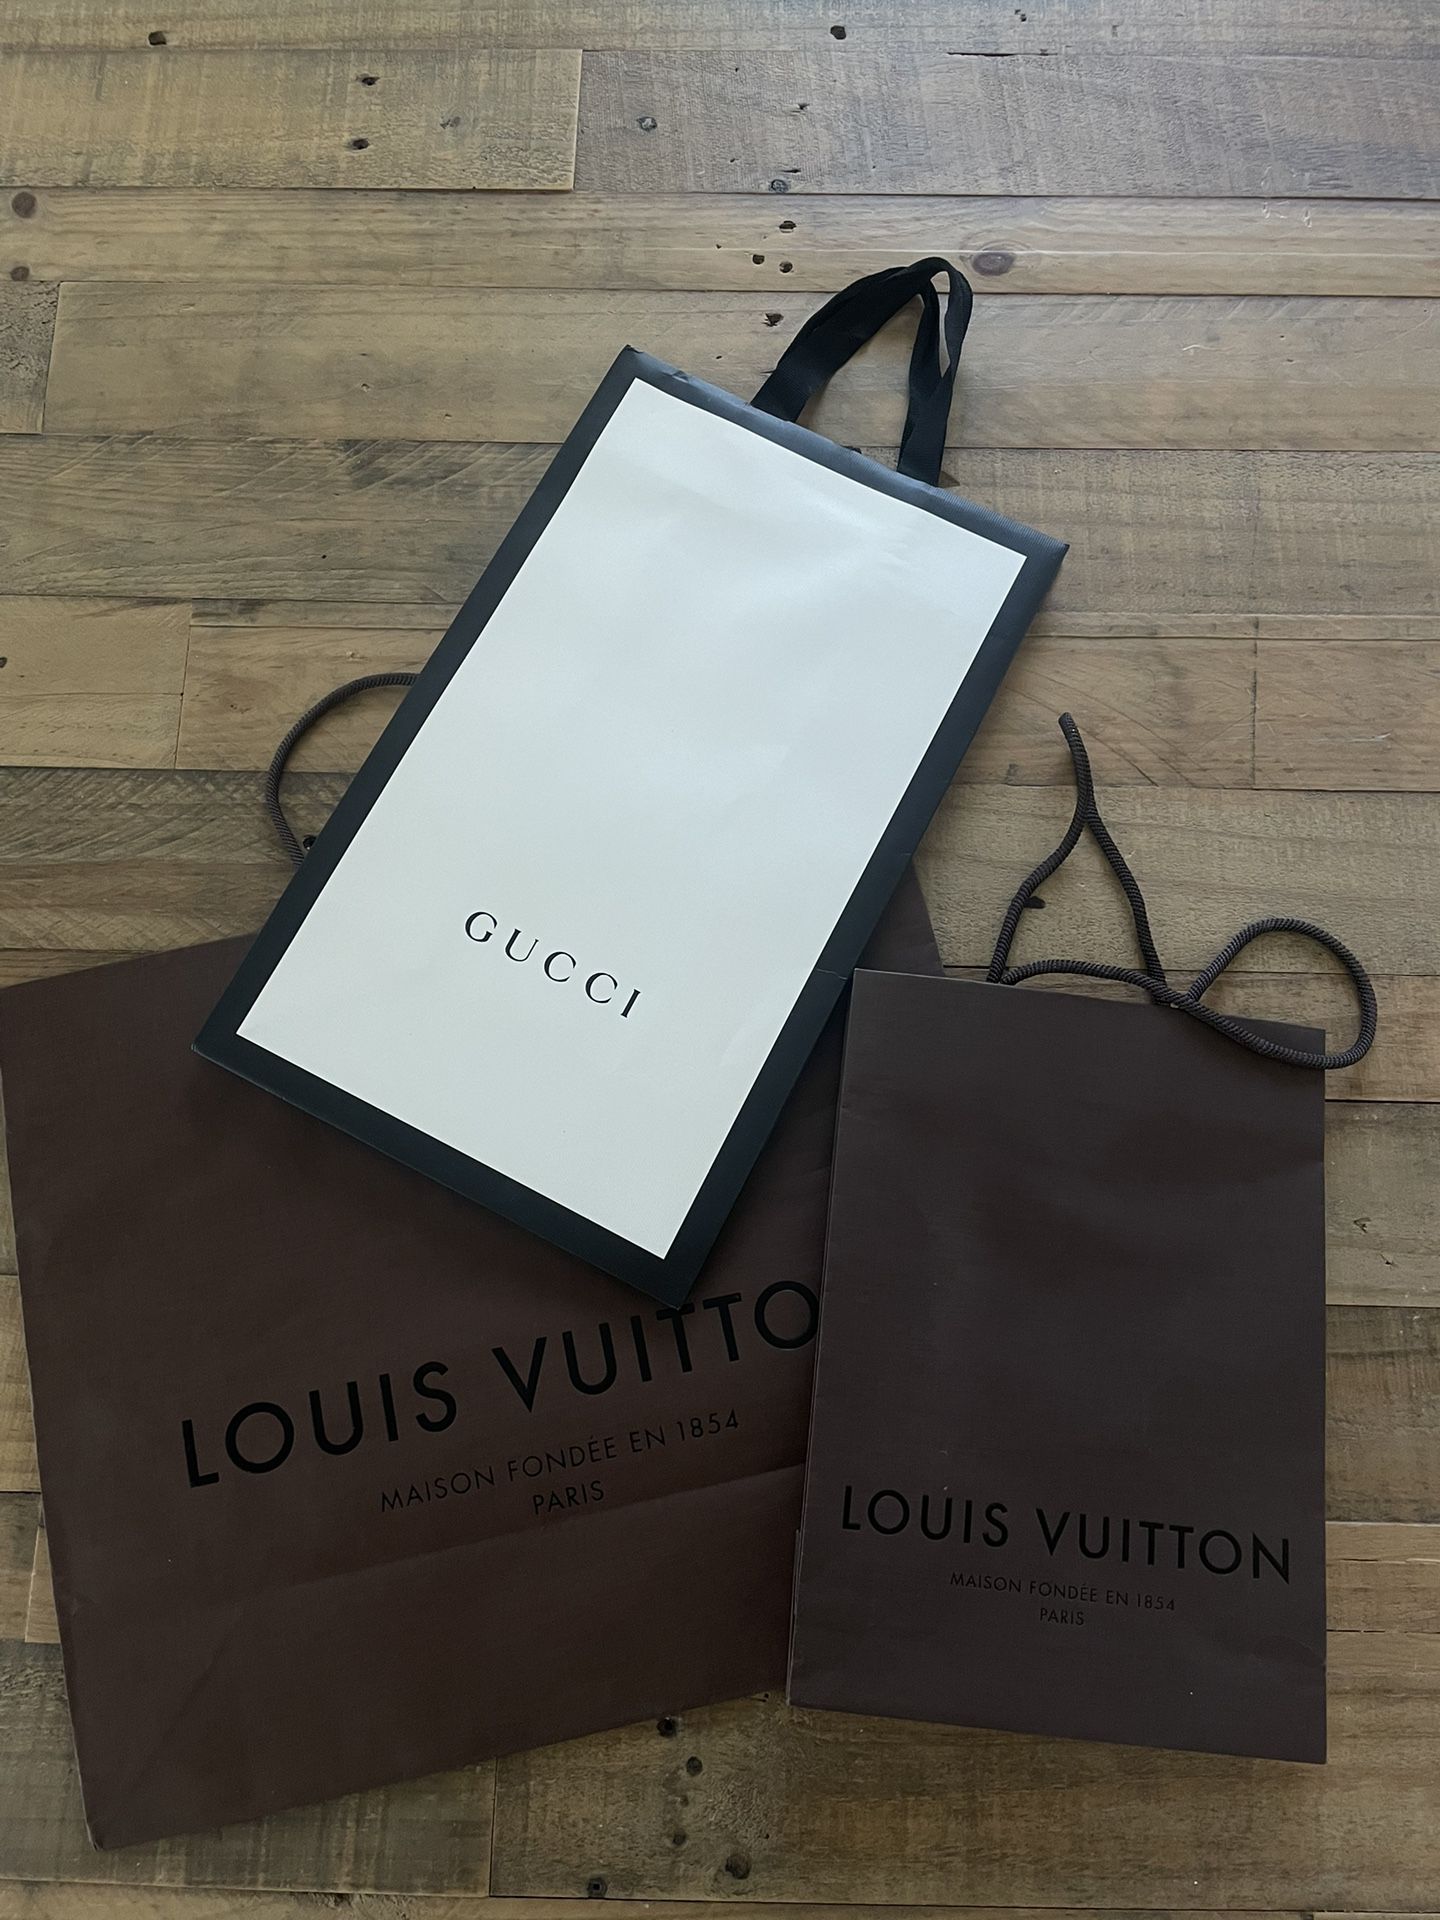 Designer, Gucci and Louis Vuitton gift bag